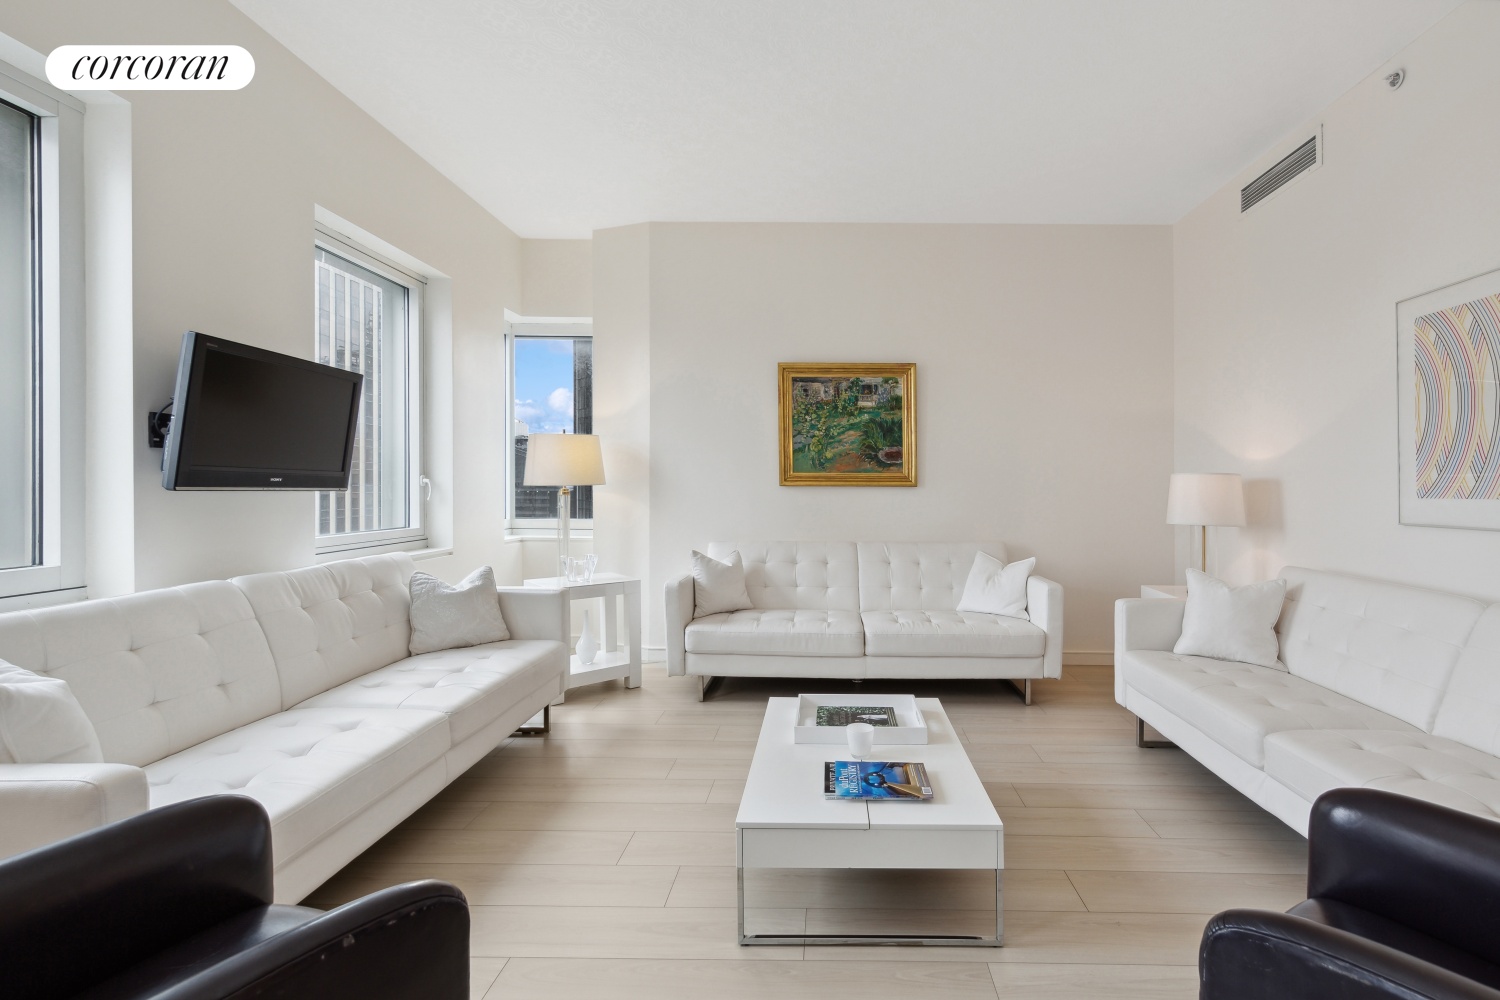 70 West 45th Street Ph2, Chelsea And Clinton, Downtown, NYC - 4 Bedrooms  
3.5 Bathrooms  
7 Rooms - 